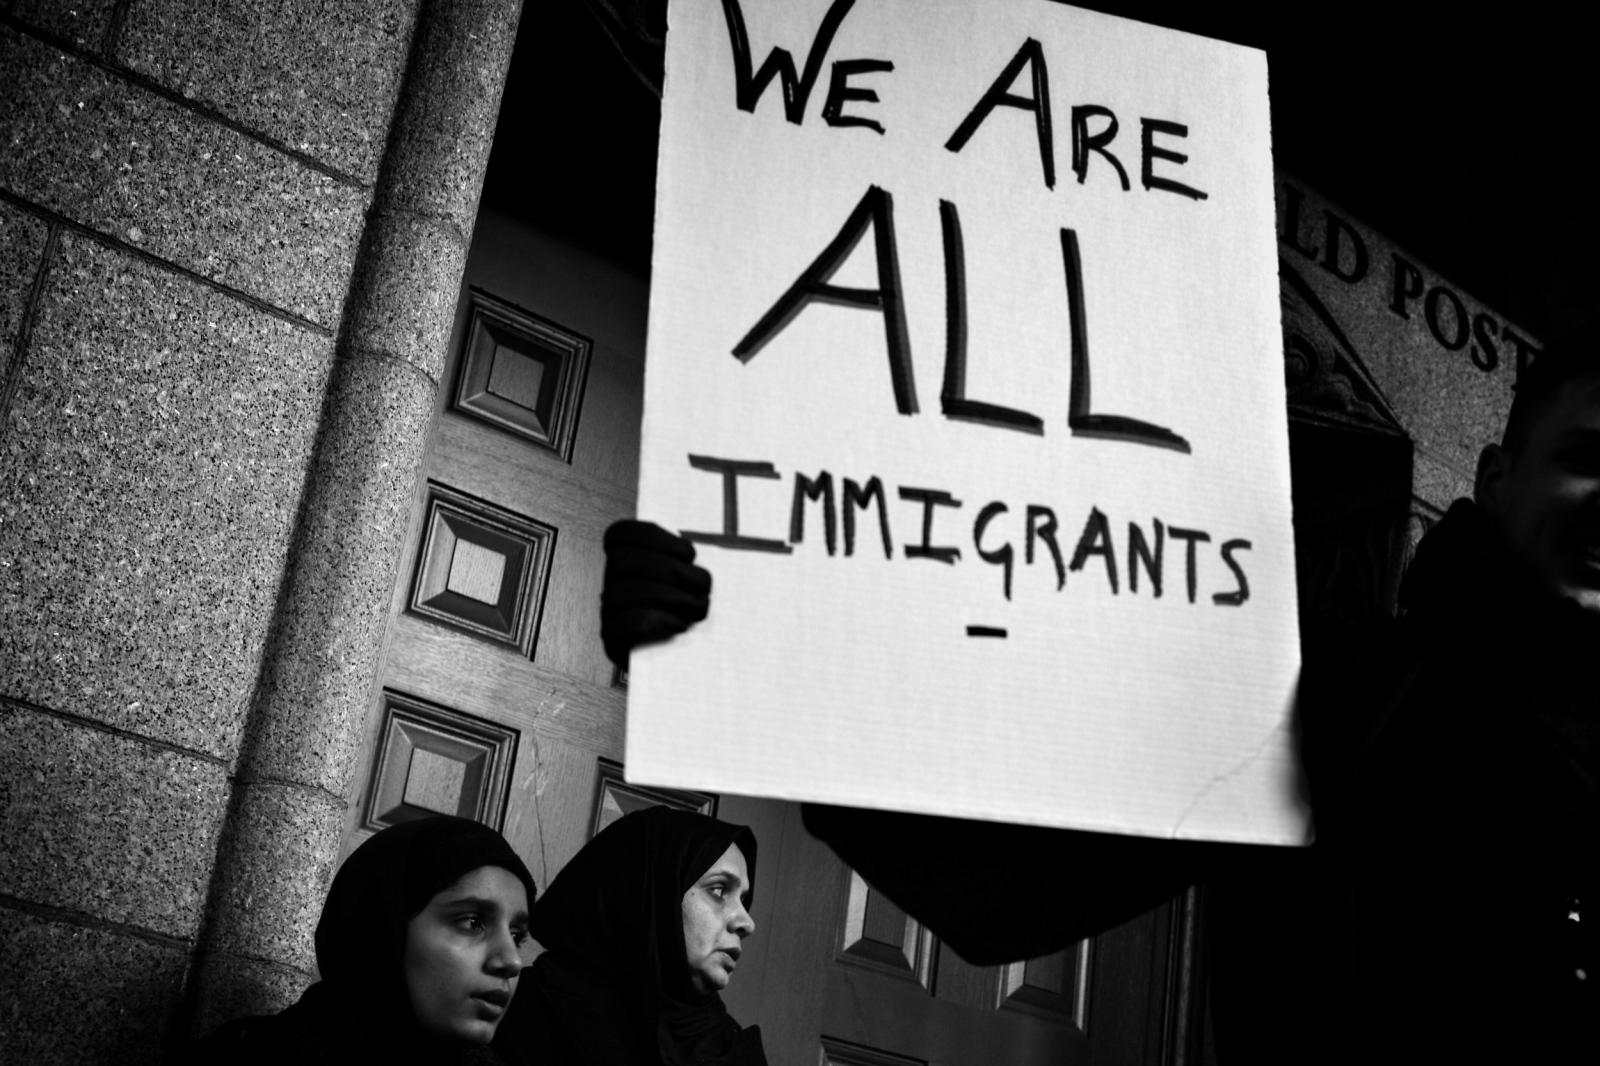 WHOSE AMERICA? OUR AMERICA! Standing up for immigrant rights